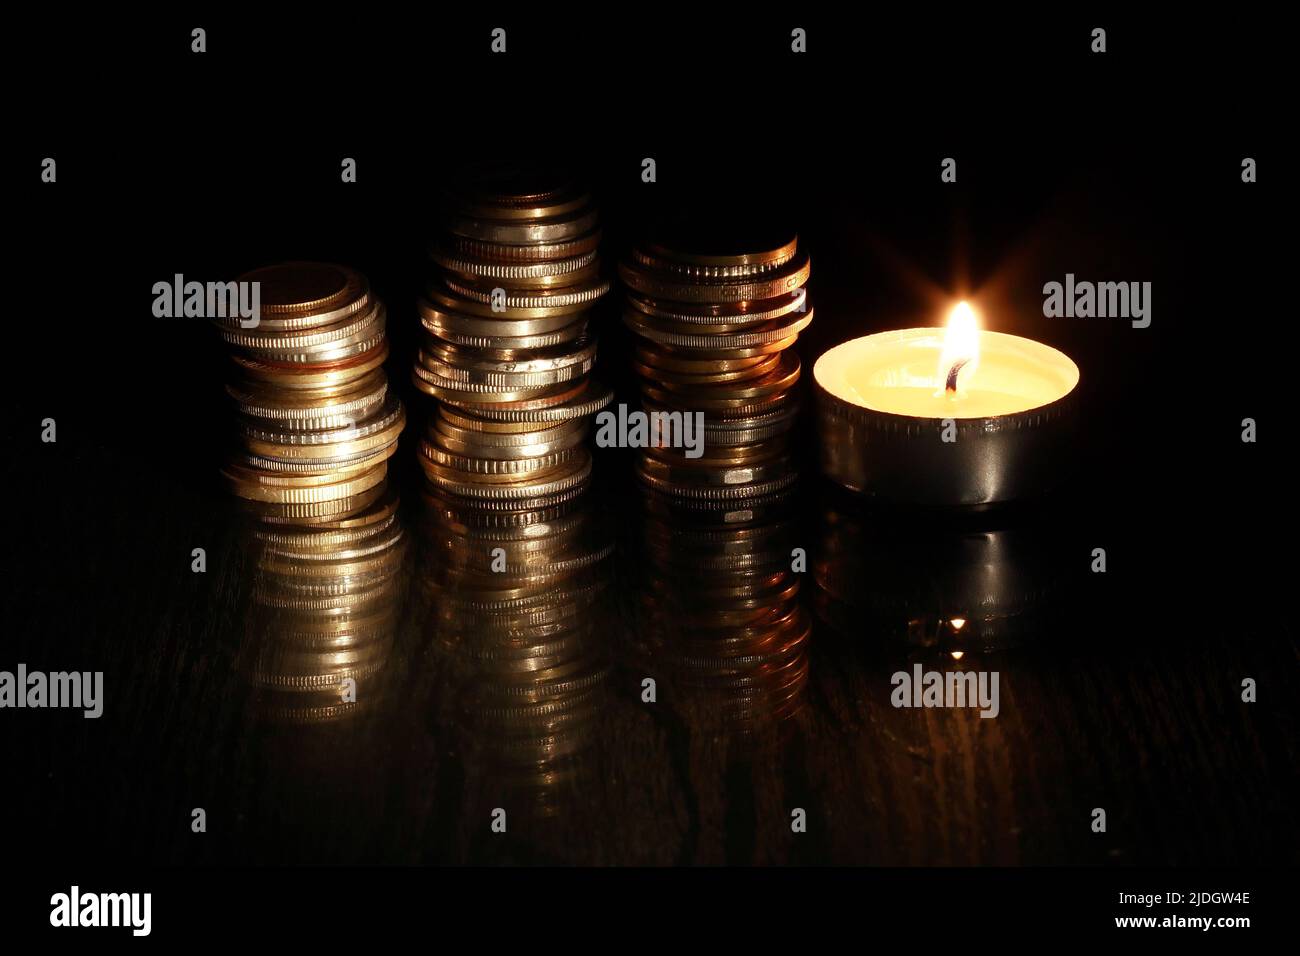 Set of coins near lighting candle on dark background Stock Photo